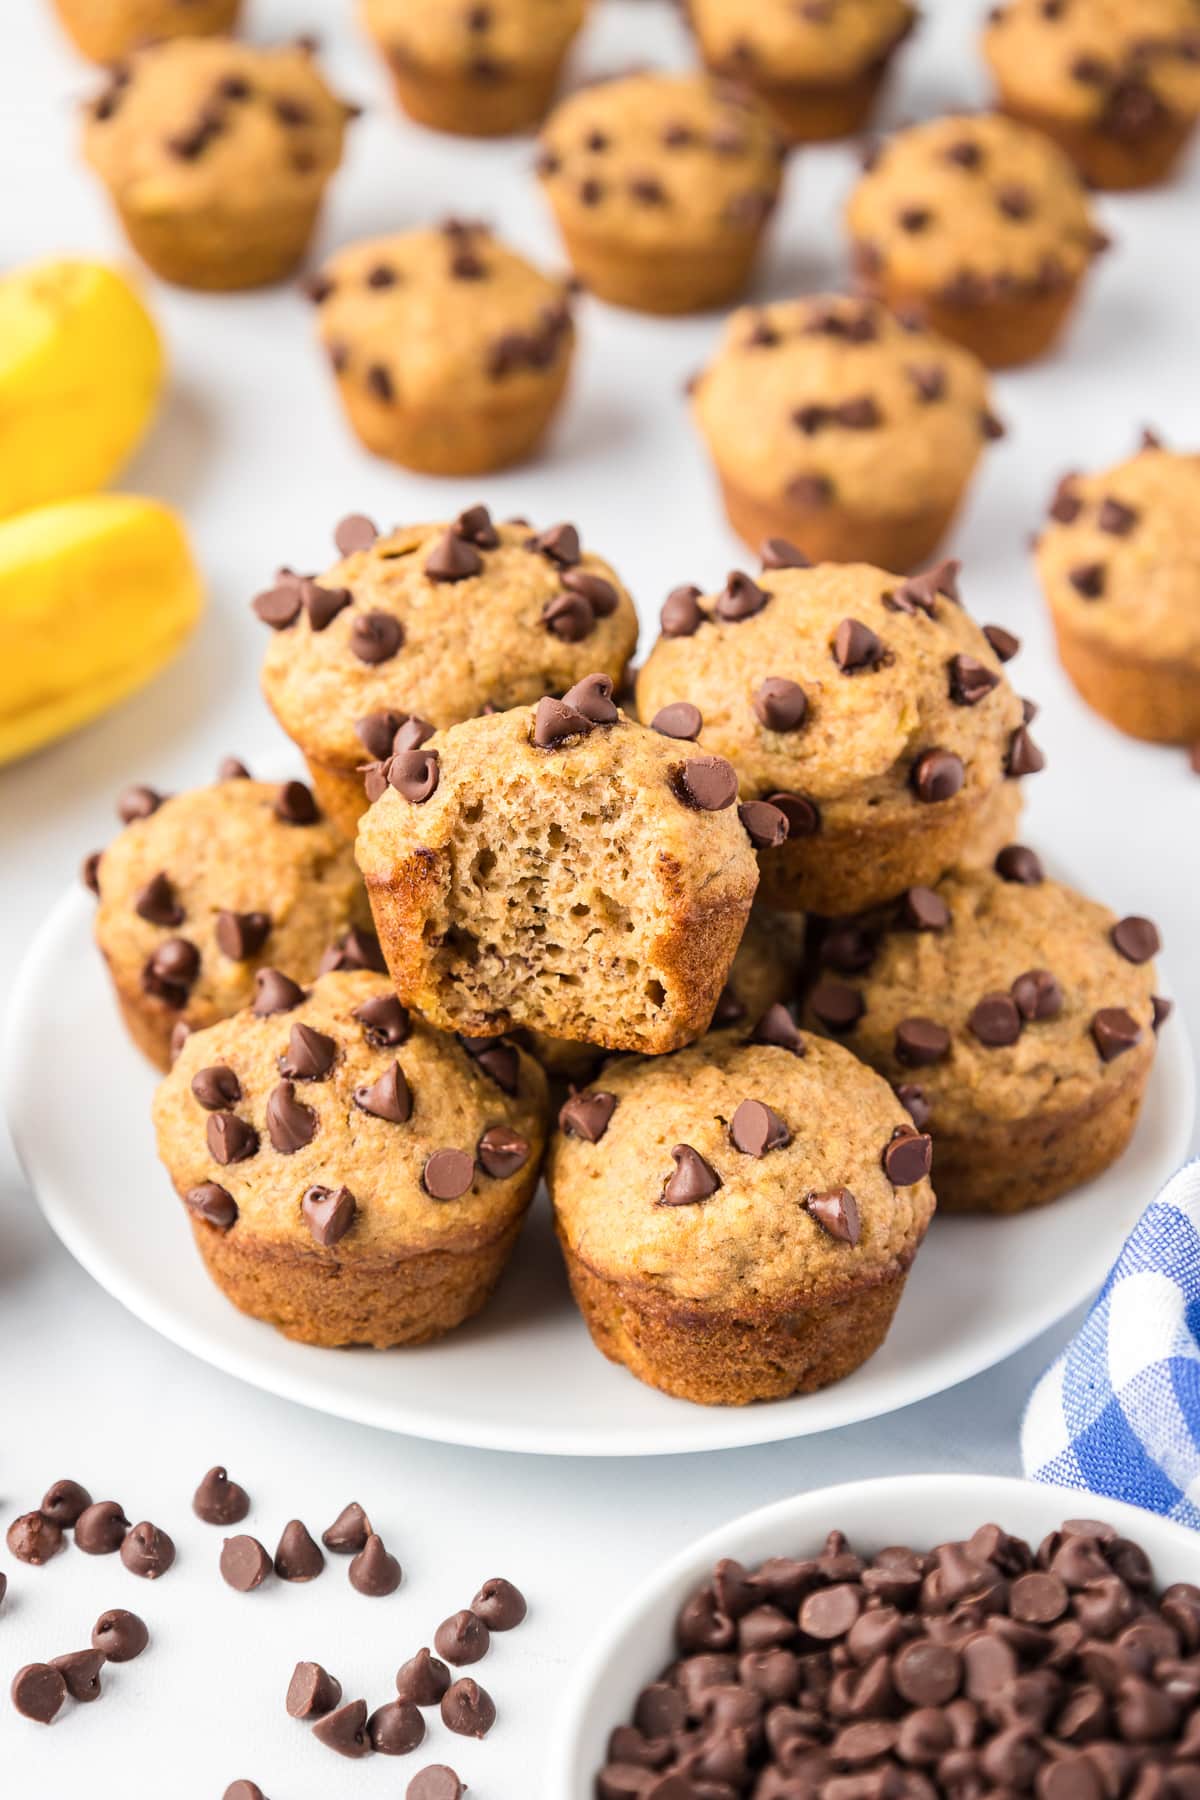 Plate of freshly baked mini banana chocolate chip muffins surrounded by additional muffins, chocolate chips, and bananas on a kitchen counter.